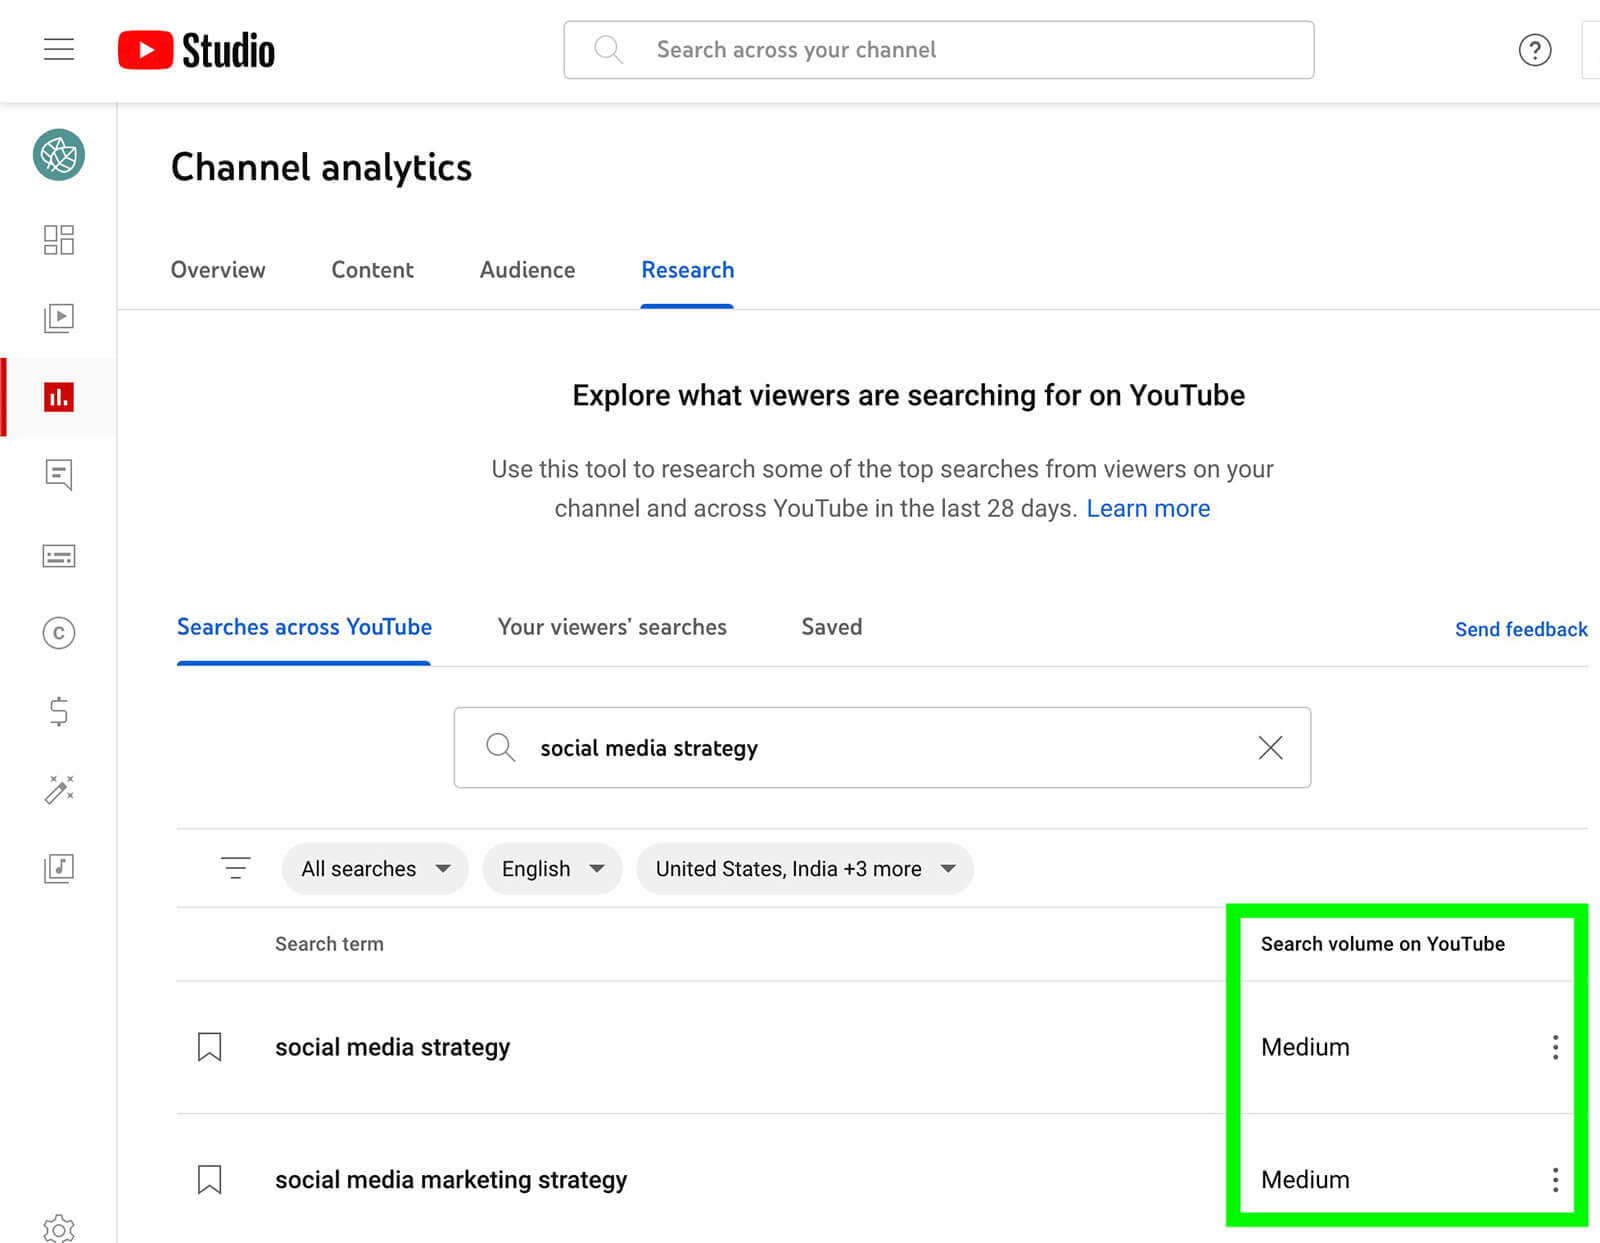 build-an-seo-strategy-for-youtube-content-plan-confirm-search-volume-5